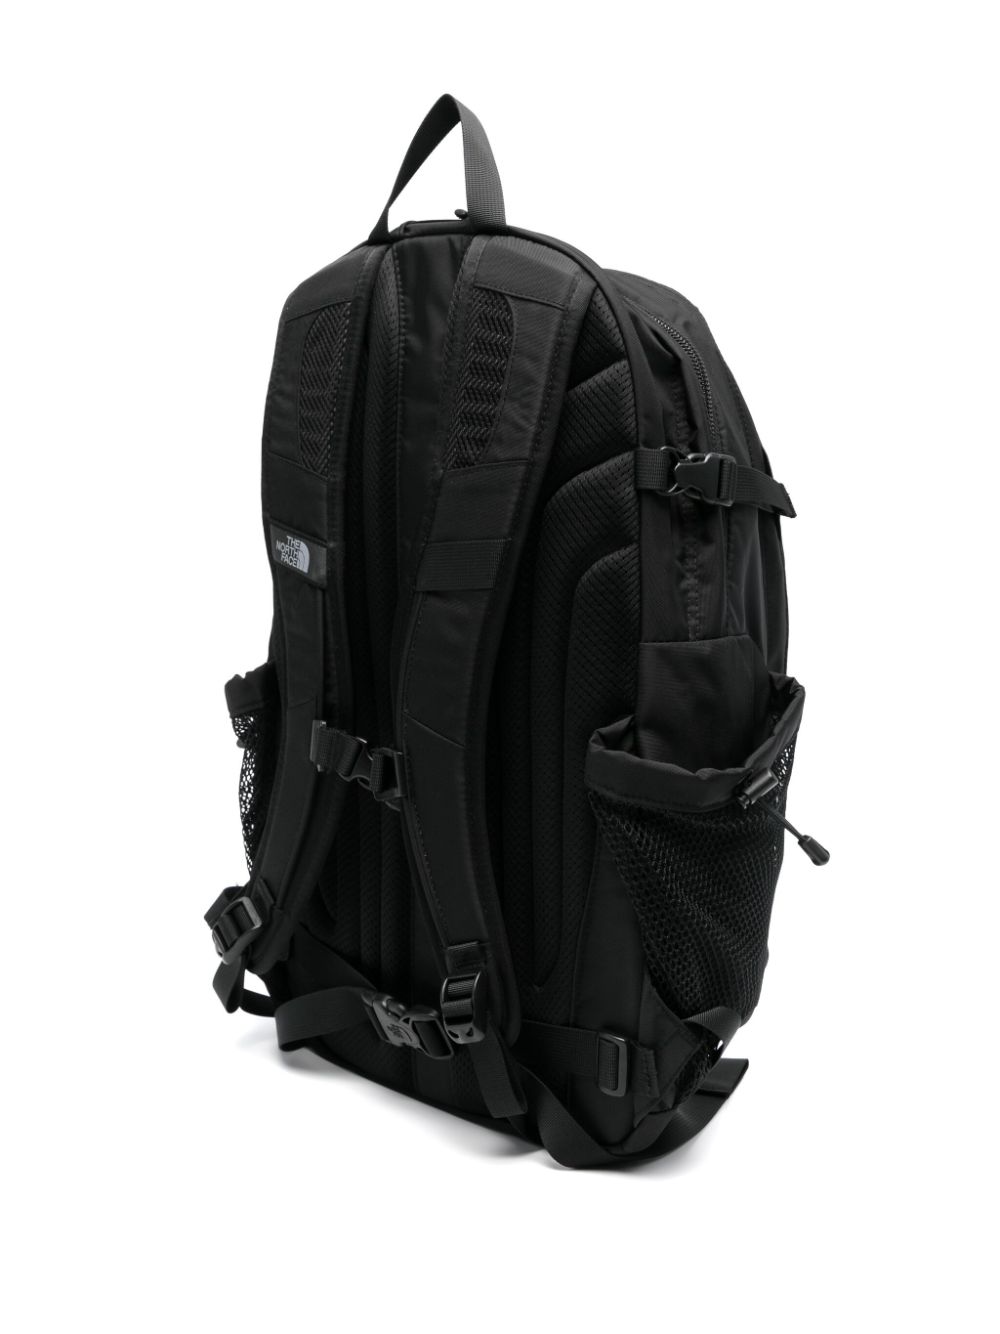 Shop The North Face Hot Shot Backpack In 黑色